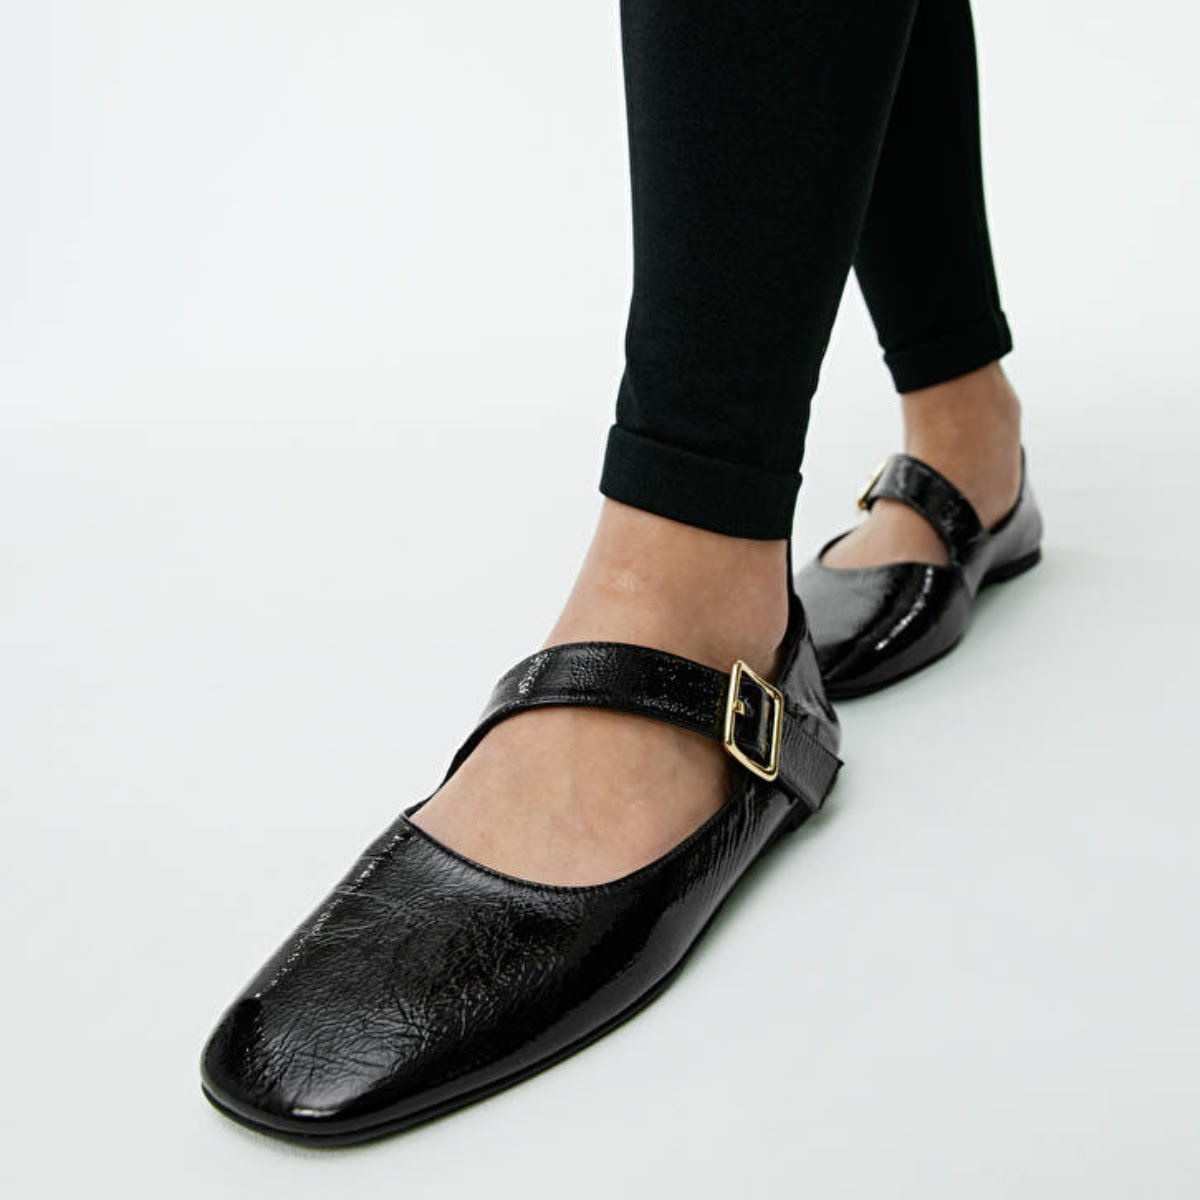 Arket Mary Jane Leather Ballet Flats, €169